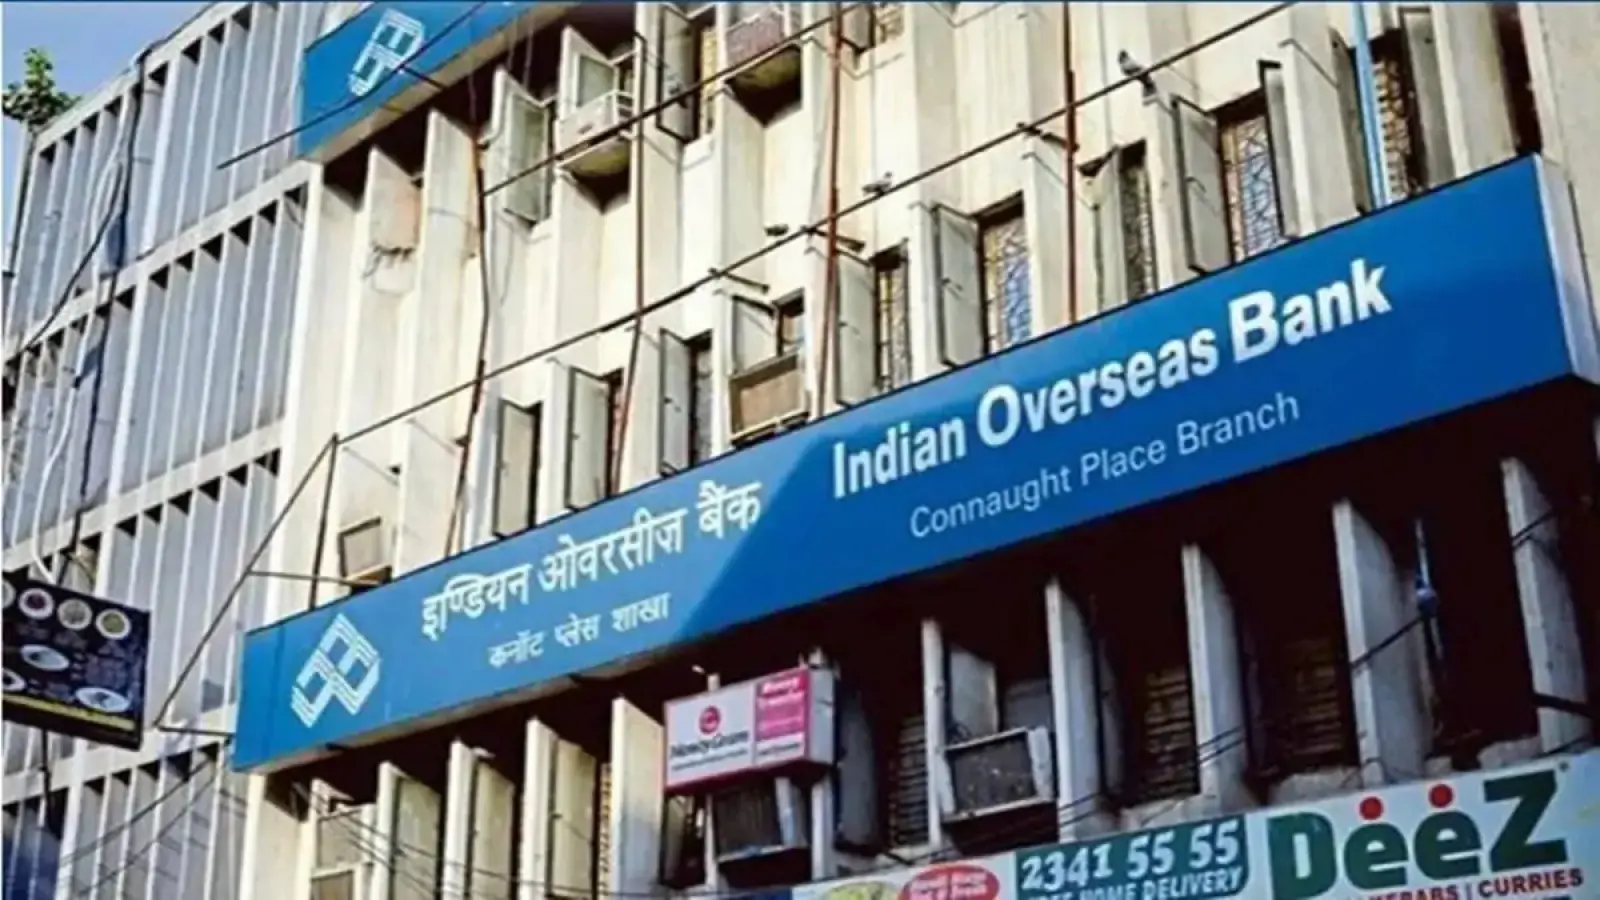 Indian Overseas Bank is expanding its business, know what the new plan